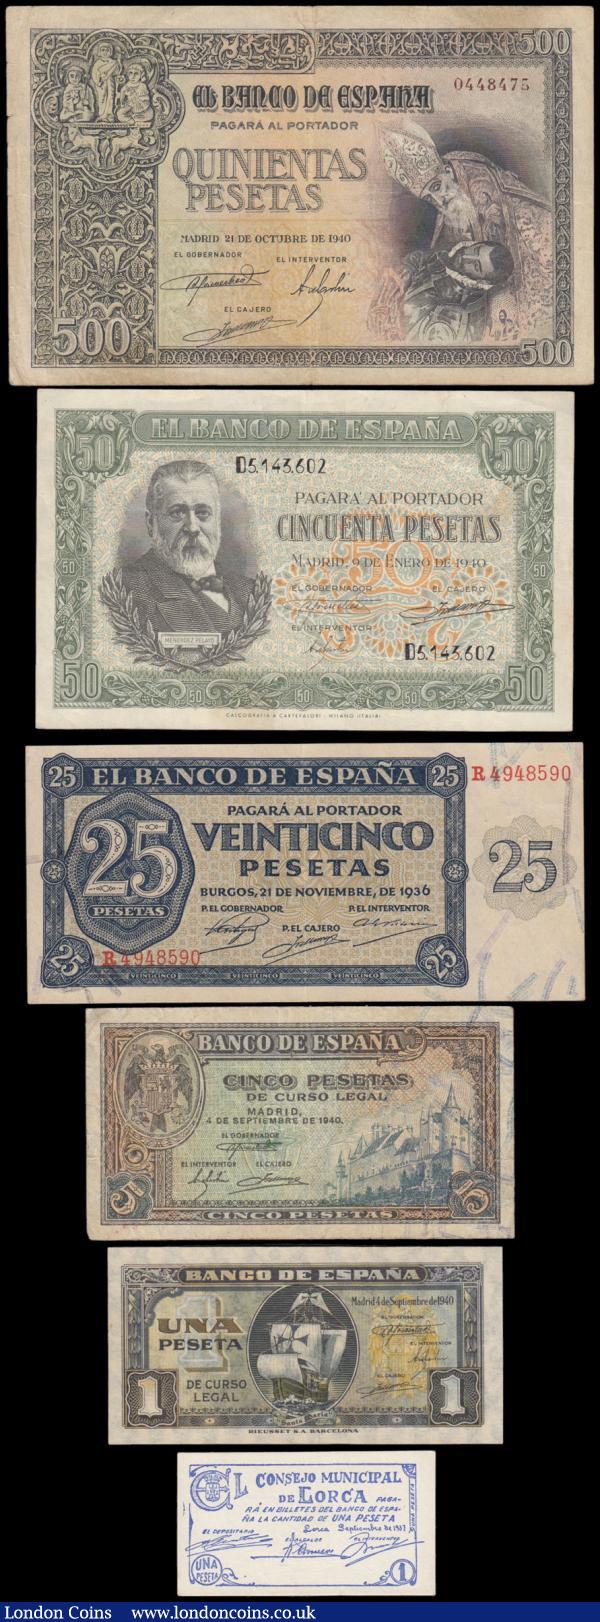 Spain (6) in mixed grades comprising 500 Pesetas Pick 124a dated 21st October 1940 serial number 04448475, 50 Pesetas Pick 117a dated 9th January 1940 serial number D51430602, 25 Pesetas Pick 99a dated 21st November 1936 serial number R4948590, Local Provisional issue 1 Peseta Consejo Municipal de Lorca, 5 Pesetas Pick 123a dated 4th September 1940 serial number C0366796 and  1 Peseta Pick 122a dated 4th September 1940 serial number I 2774567 and very Scarce issues : World Banknotes : Auction 166 : Lot 423